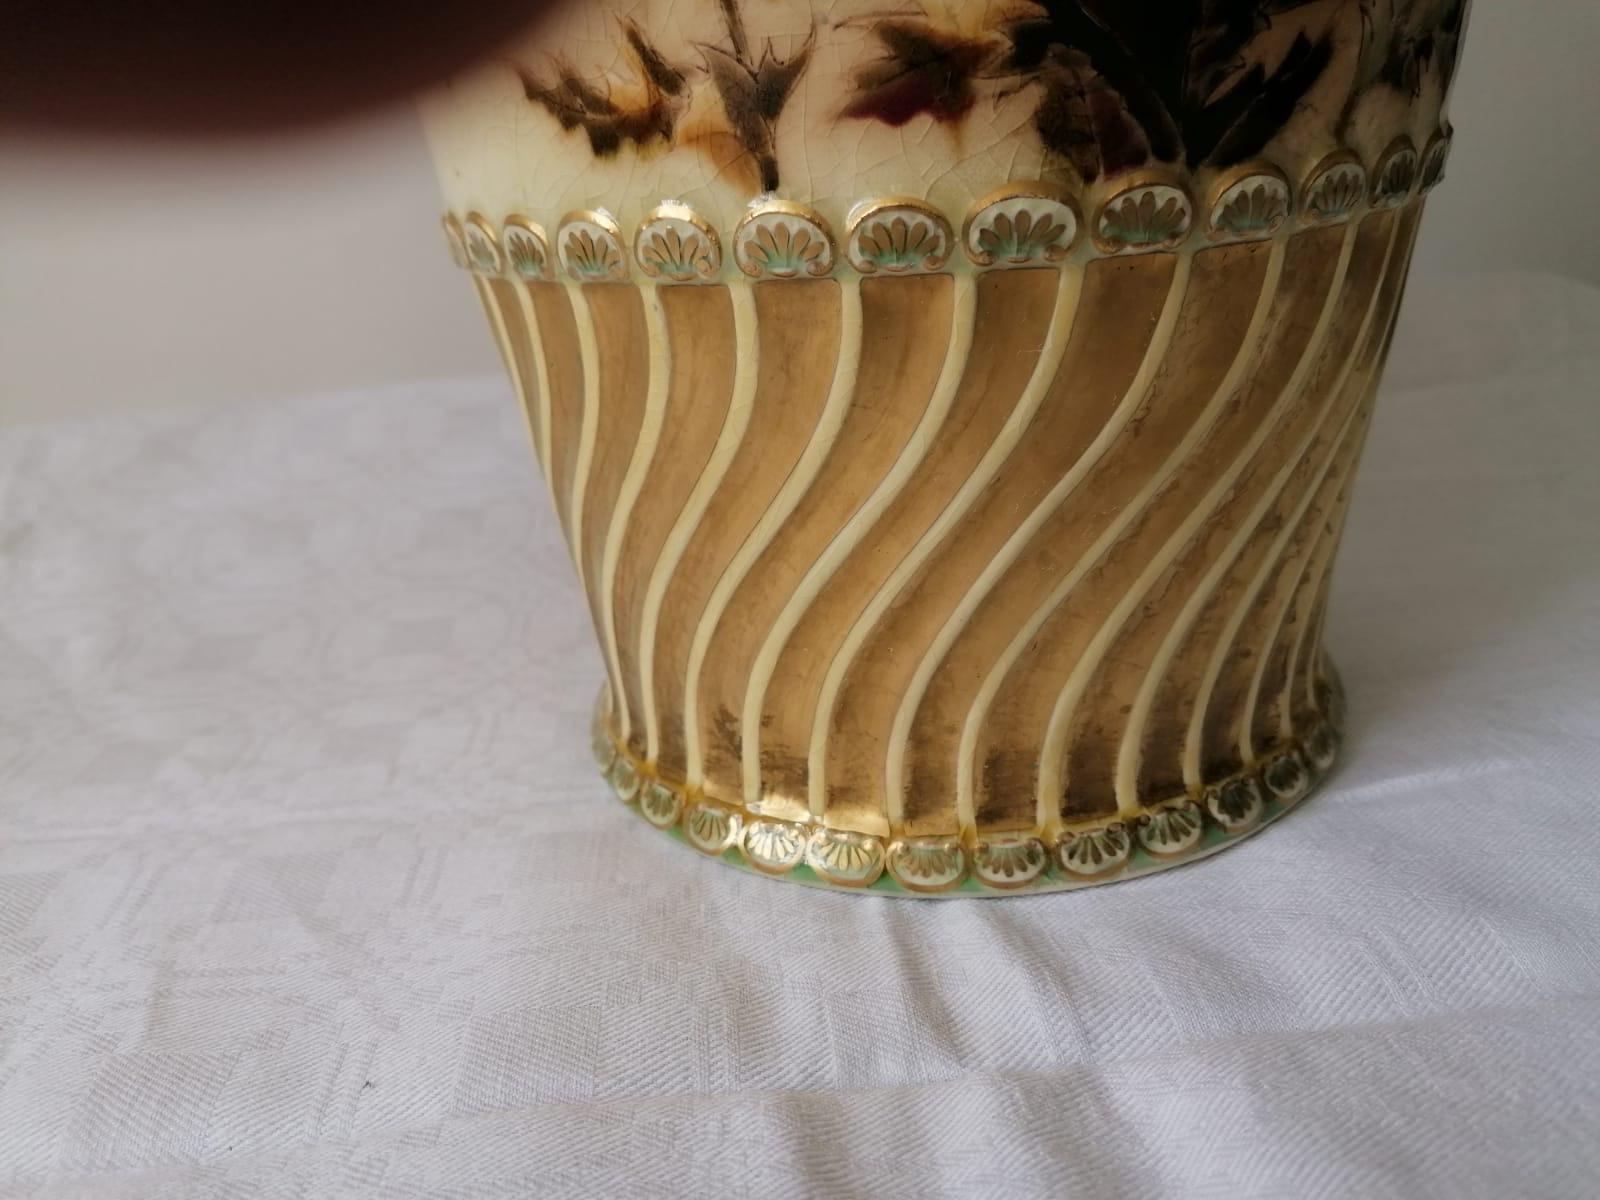 Porcelain faience, partially double-walled openwork, floral decoration painted in color and gold, height 60 cm, mark with MEK, gold edge somewhat rubbed. Made in Hungary by Zsolnay, circa 1880.